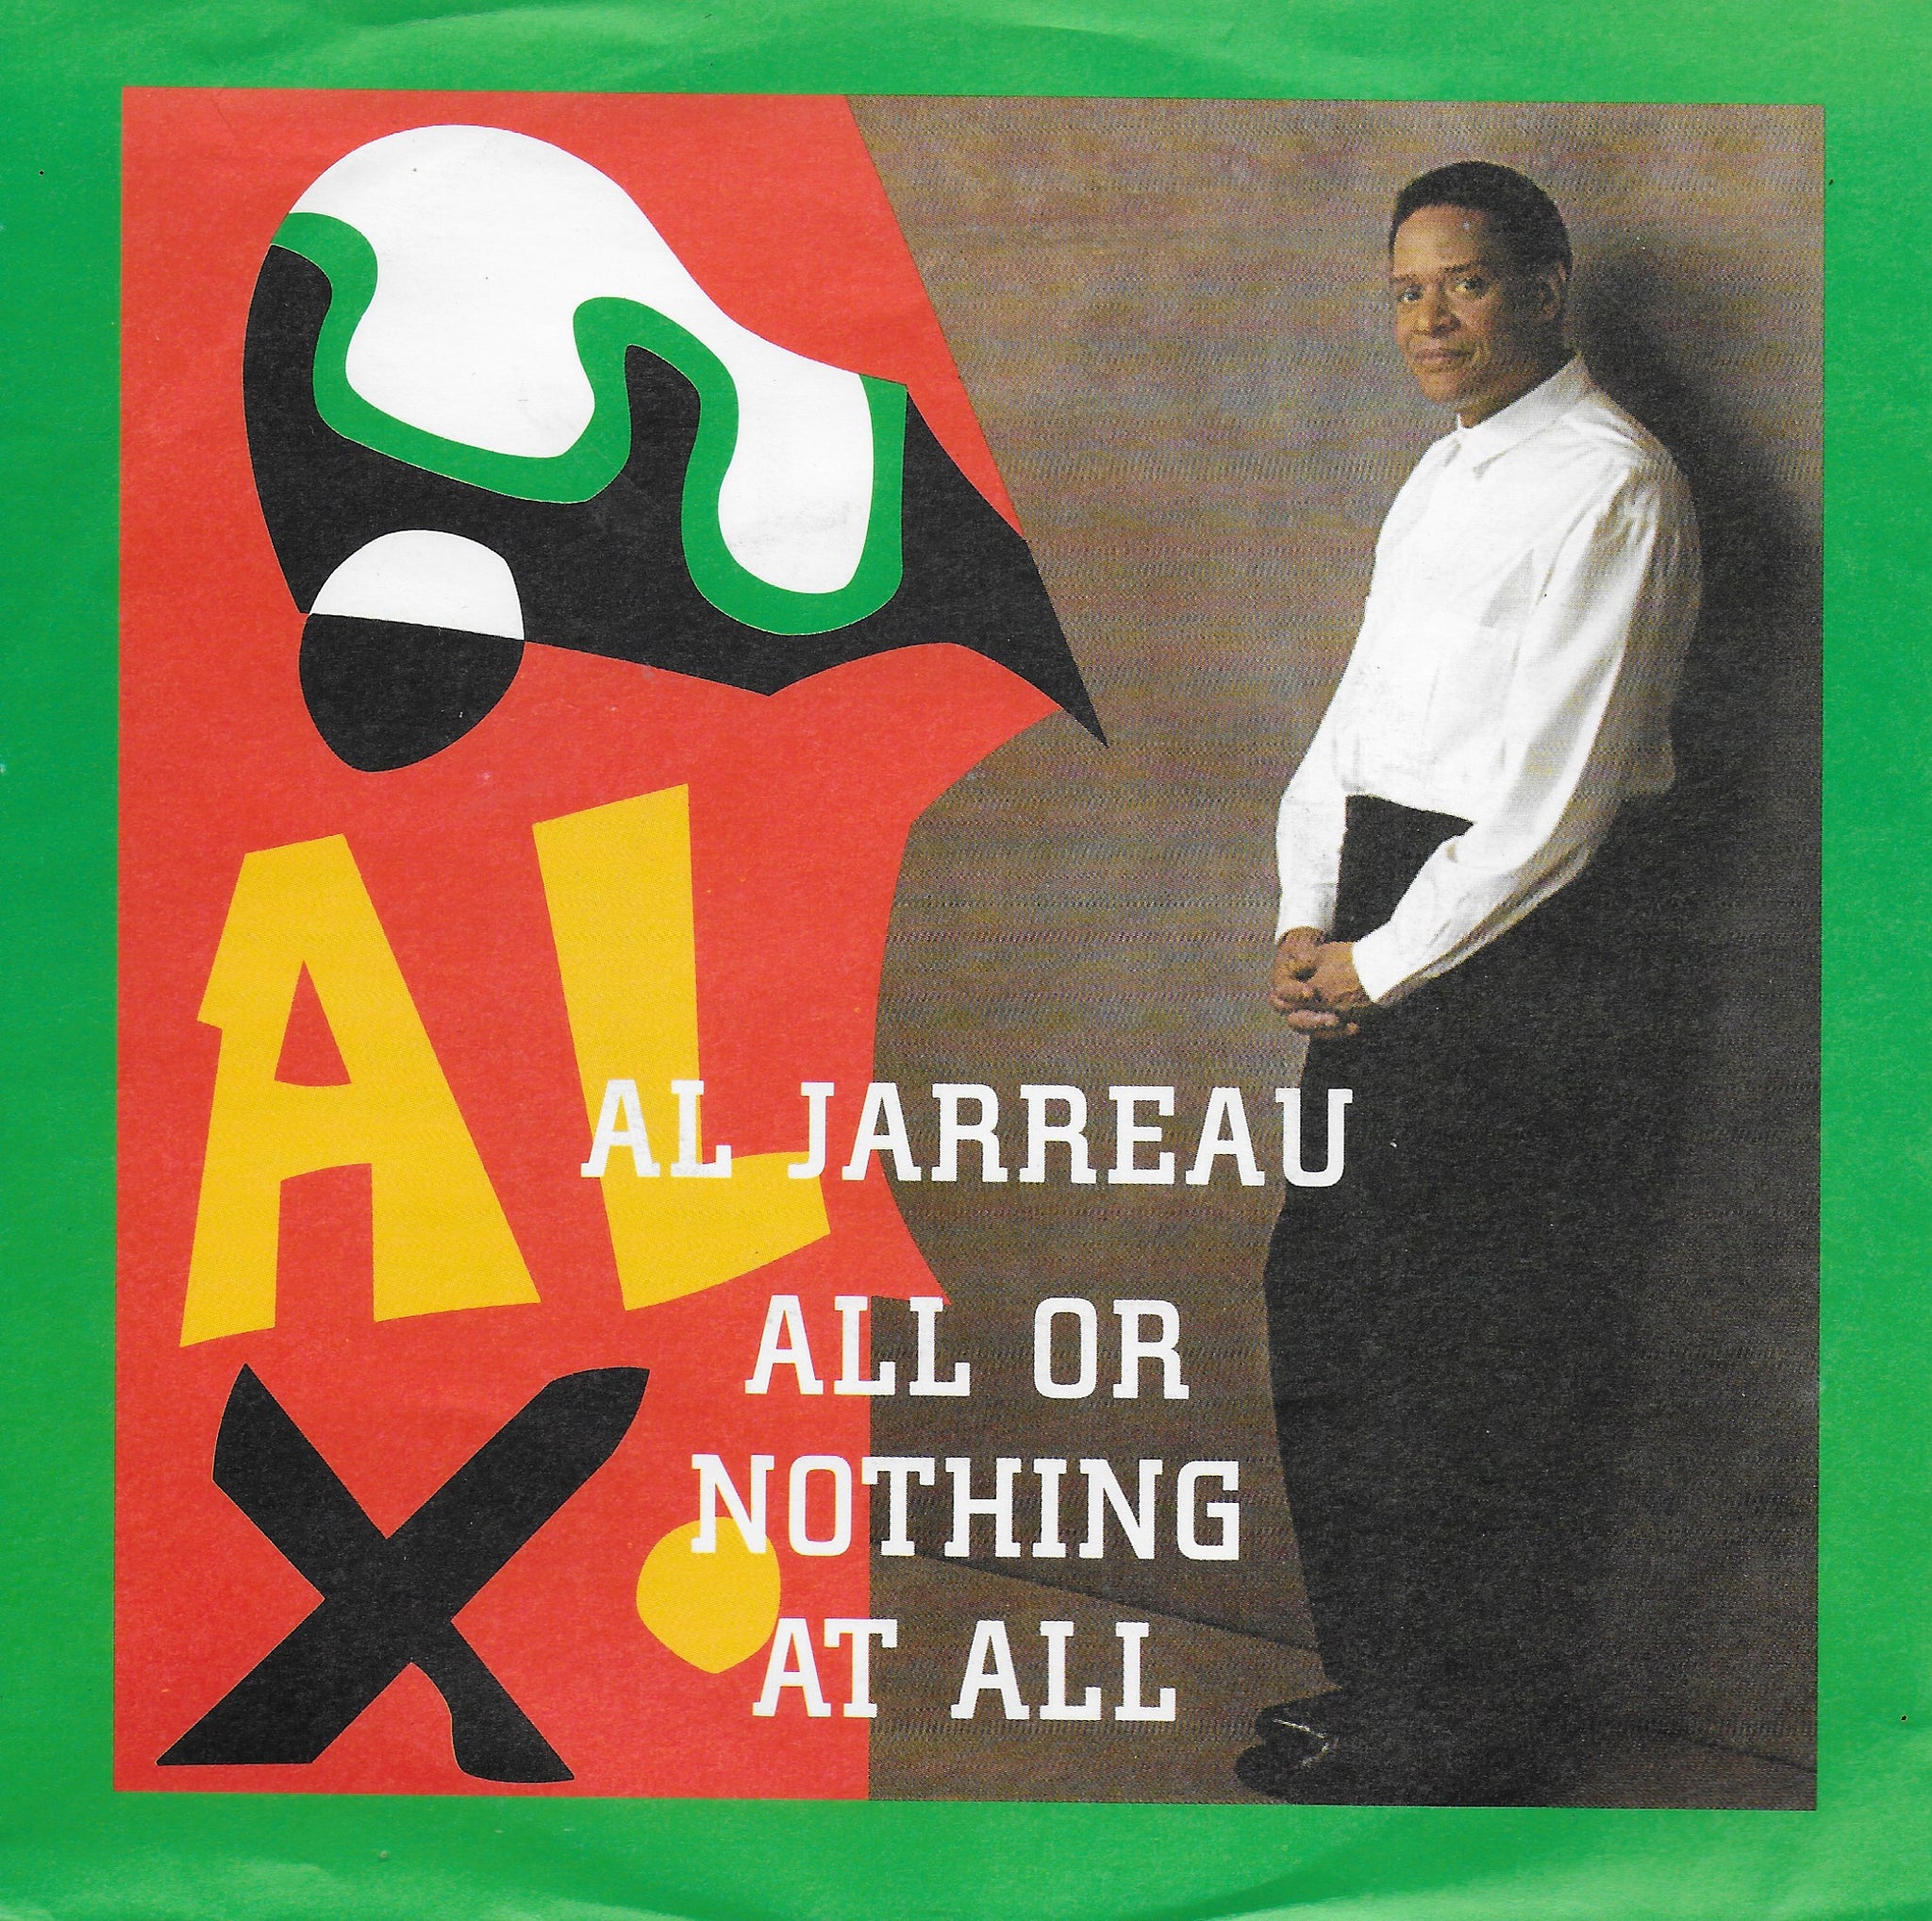 Al Jarreau - All or nothing at all